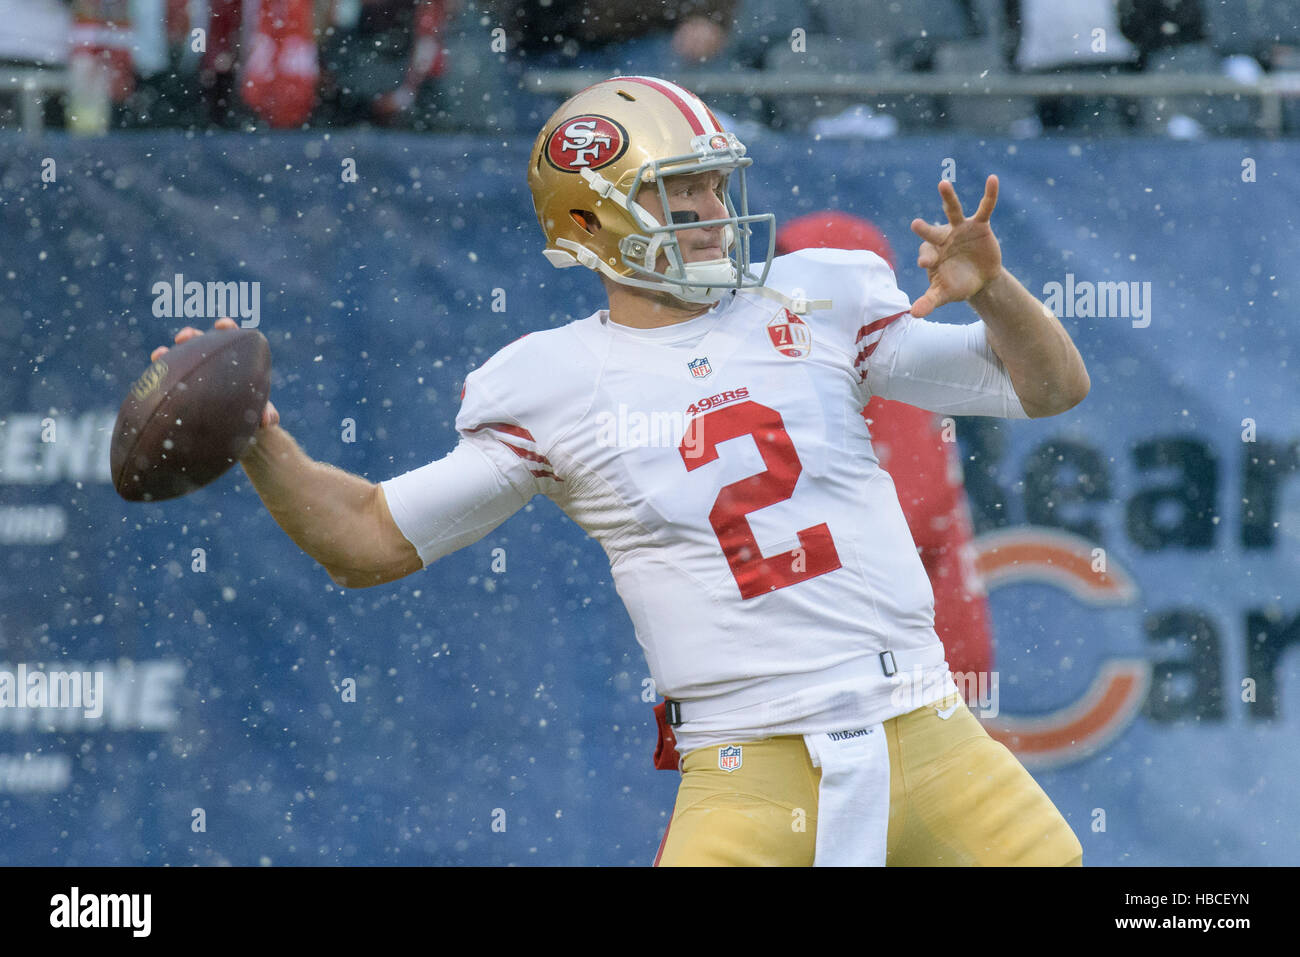 Chicago, USA. 4th December, 2016. San Francisco 49ers Quarterback Blaine Gabbert (2) before an NFL football game between the San Francisco 49ers and the Chicago Bears at Soldier Field in Chicago, IL. © Action Plus Sports Images/Alamy Live News Stock Photo